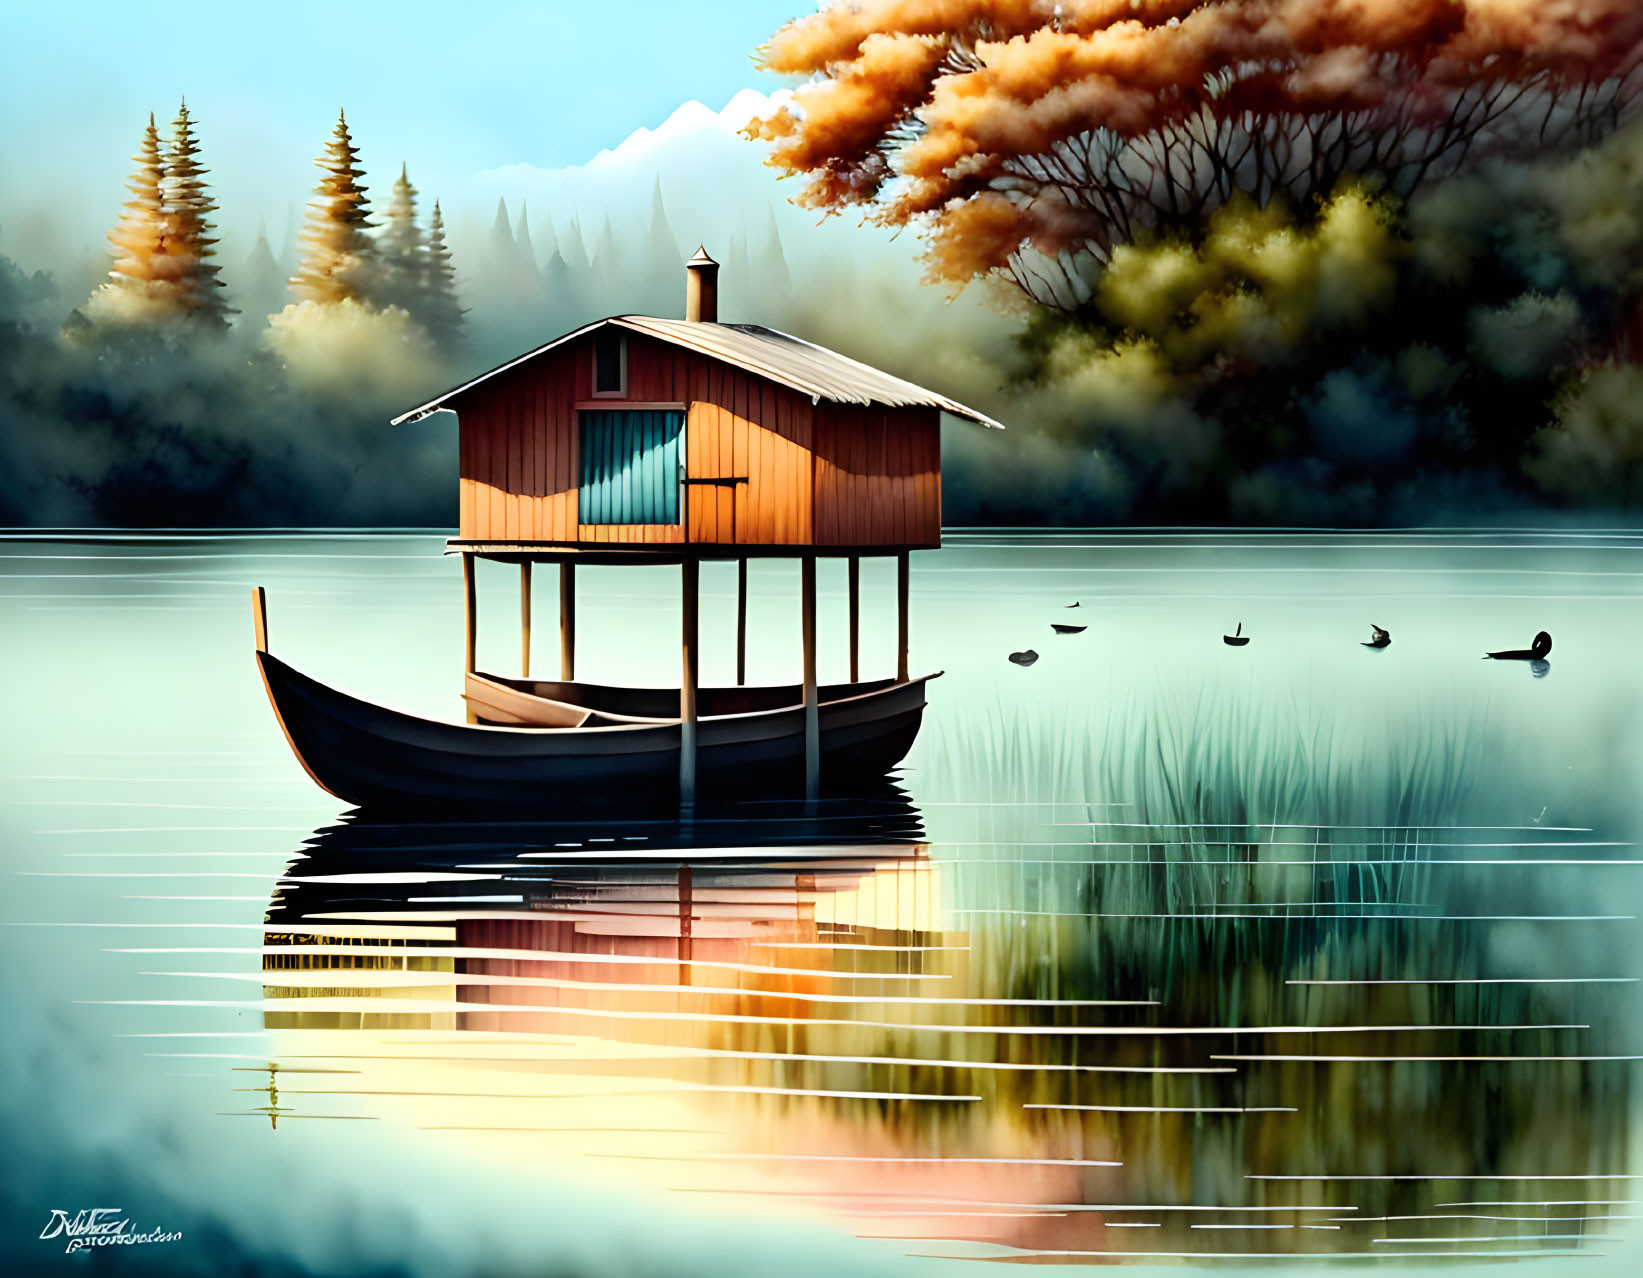 Tranquil boat house on calm lake with reflections, trees, and ducks